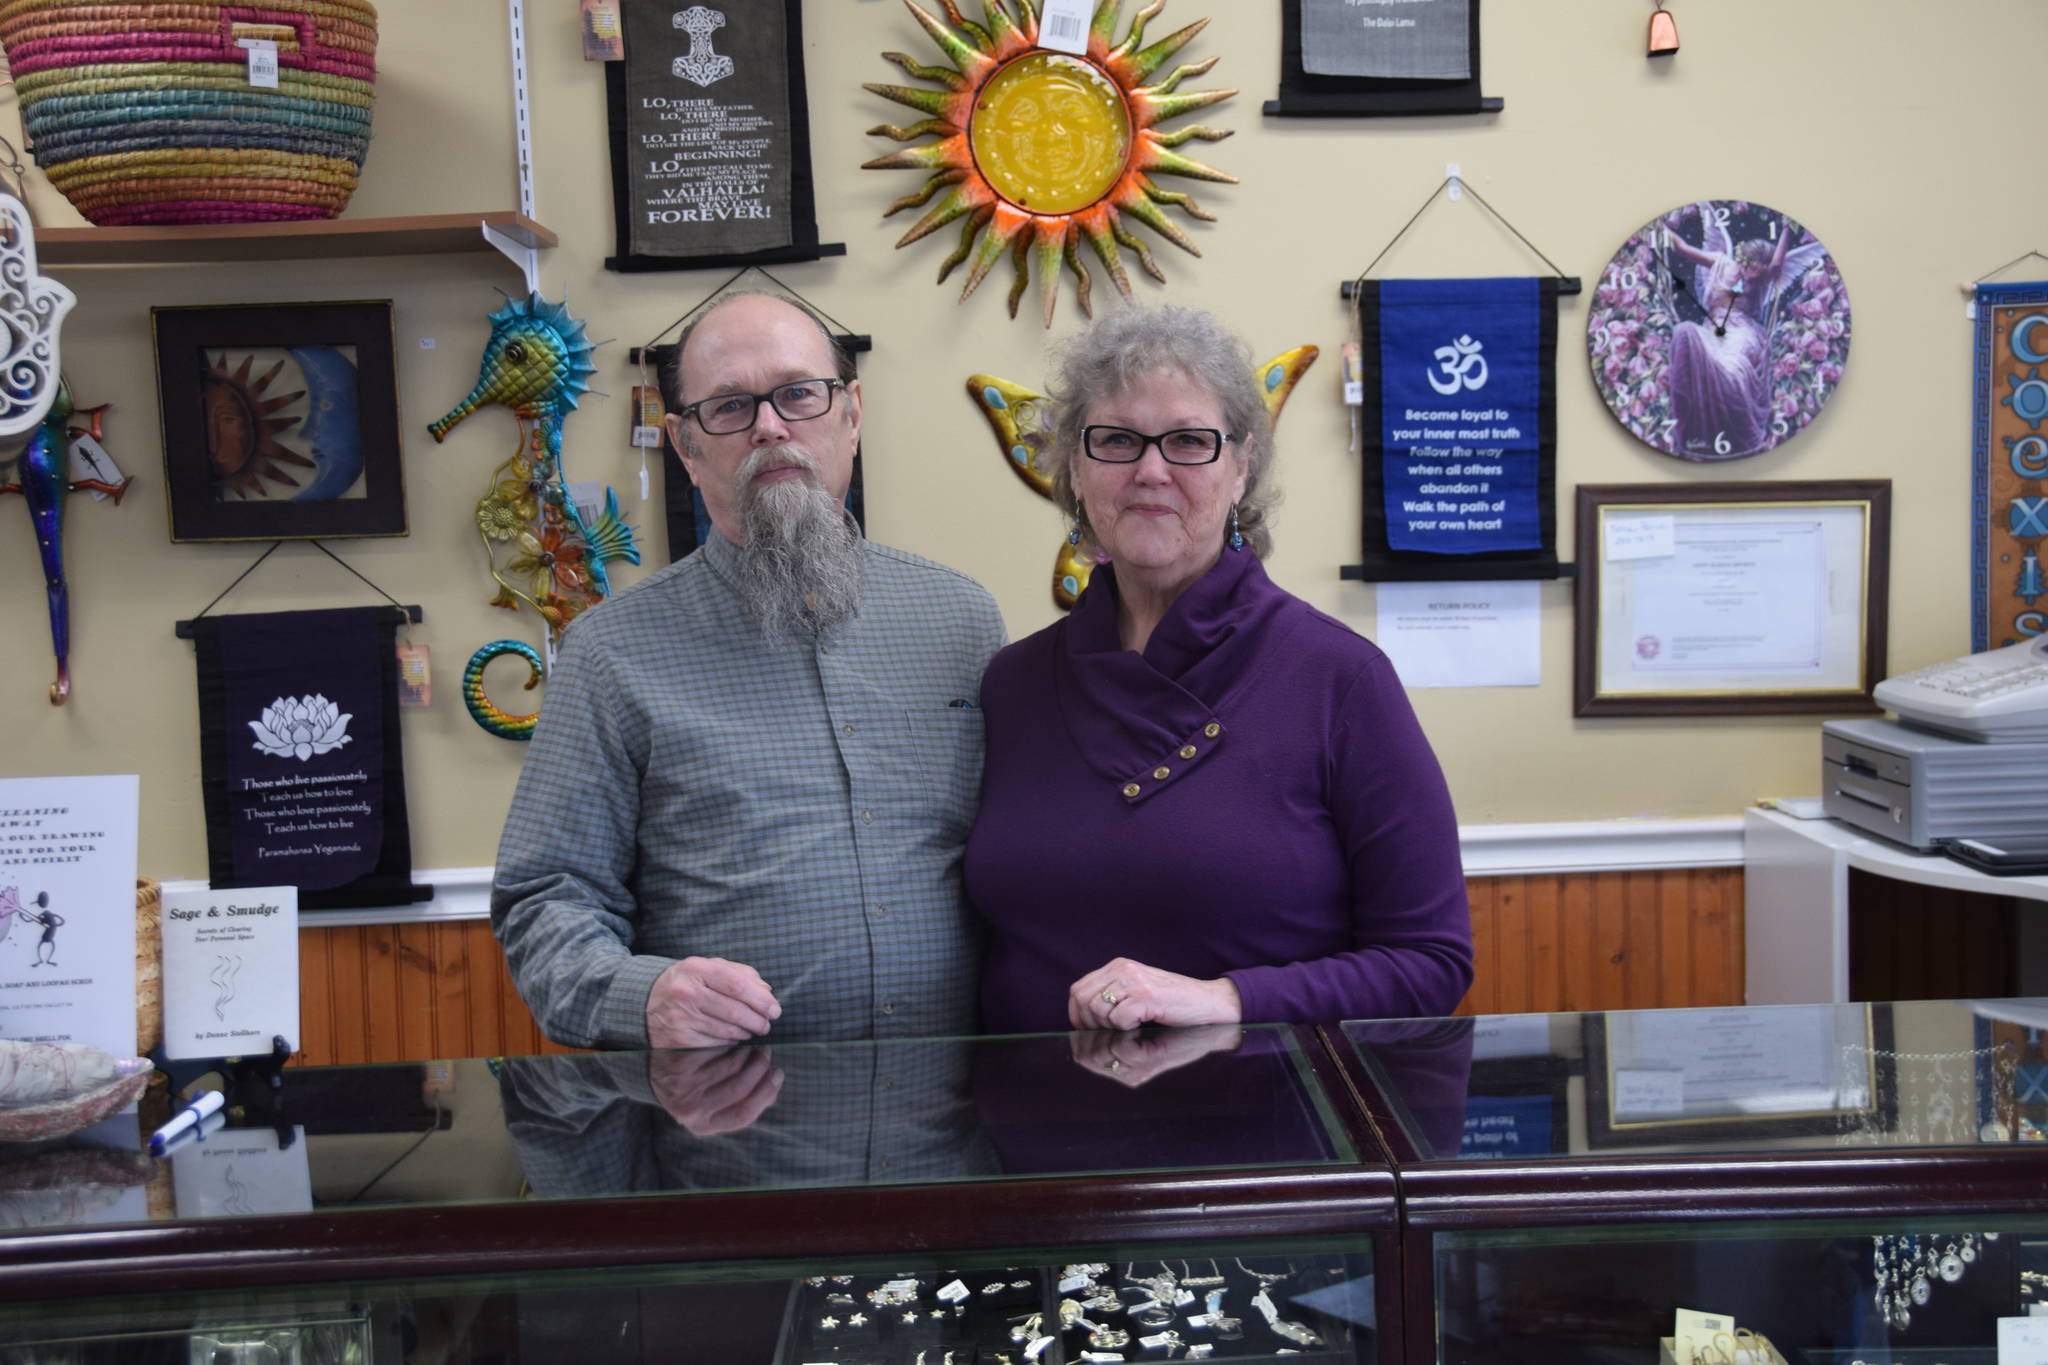 Tom and Glenna Hudson, the owners of Happy Buddha Imports, as seen on Saturday. (Photo by Brian Mazurek/Peninsula Clarion)